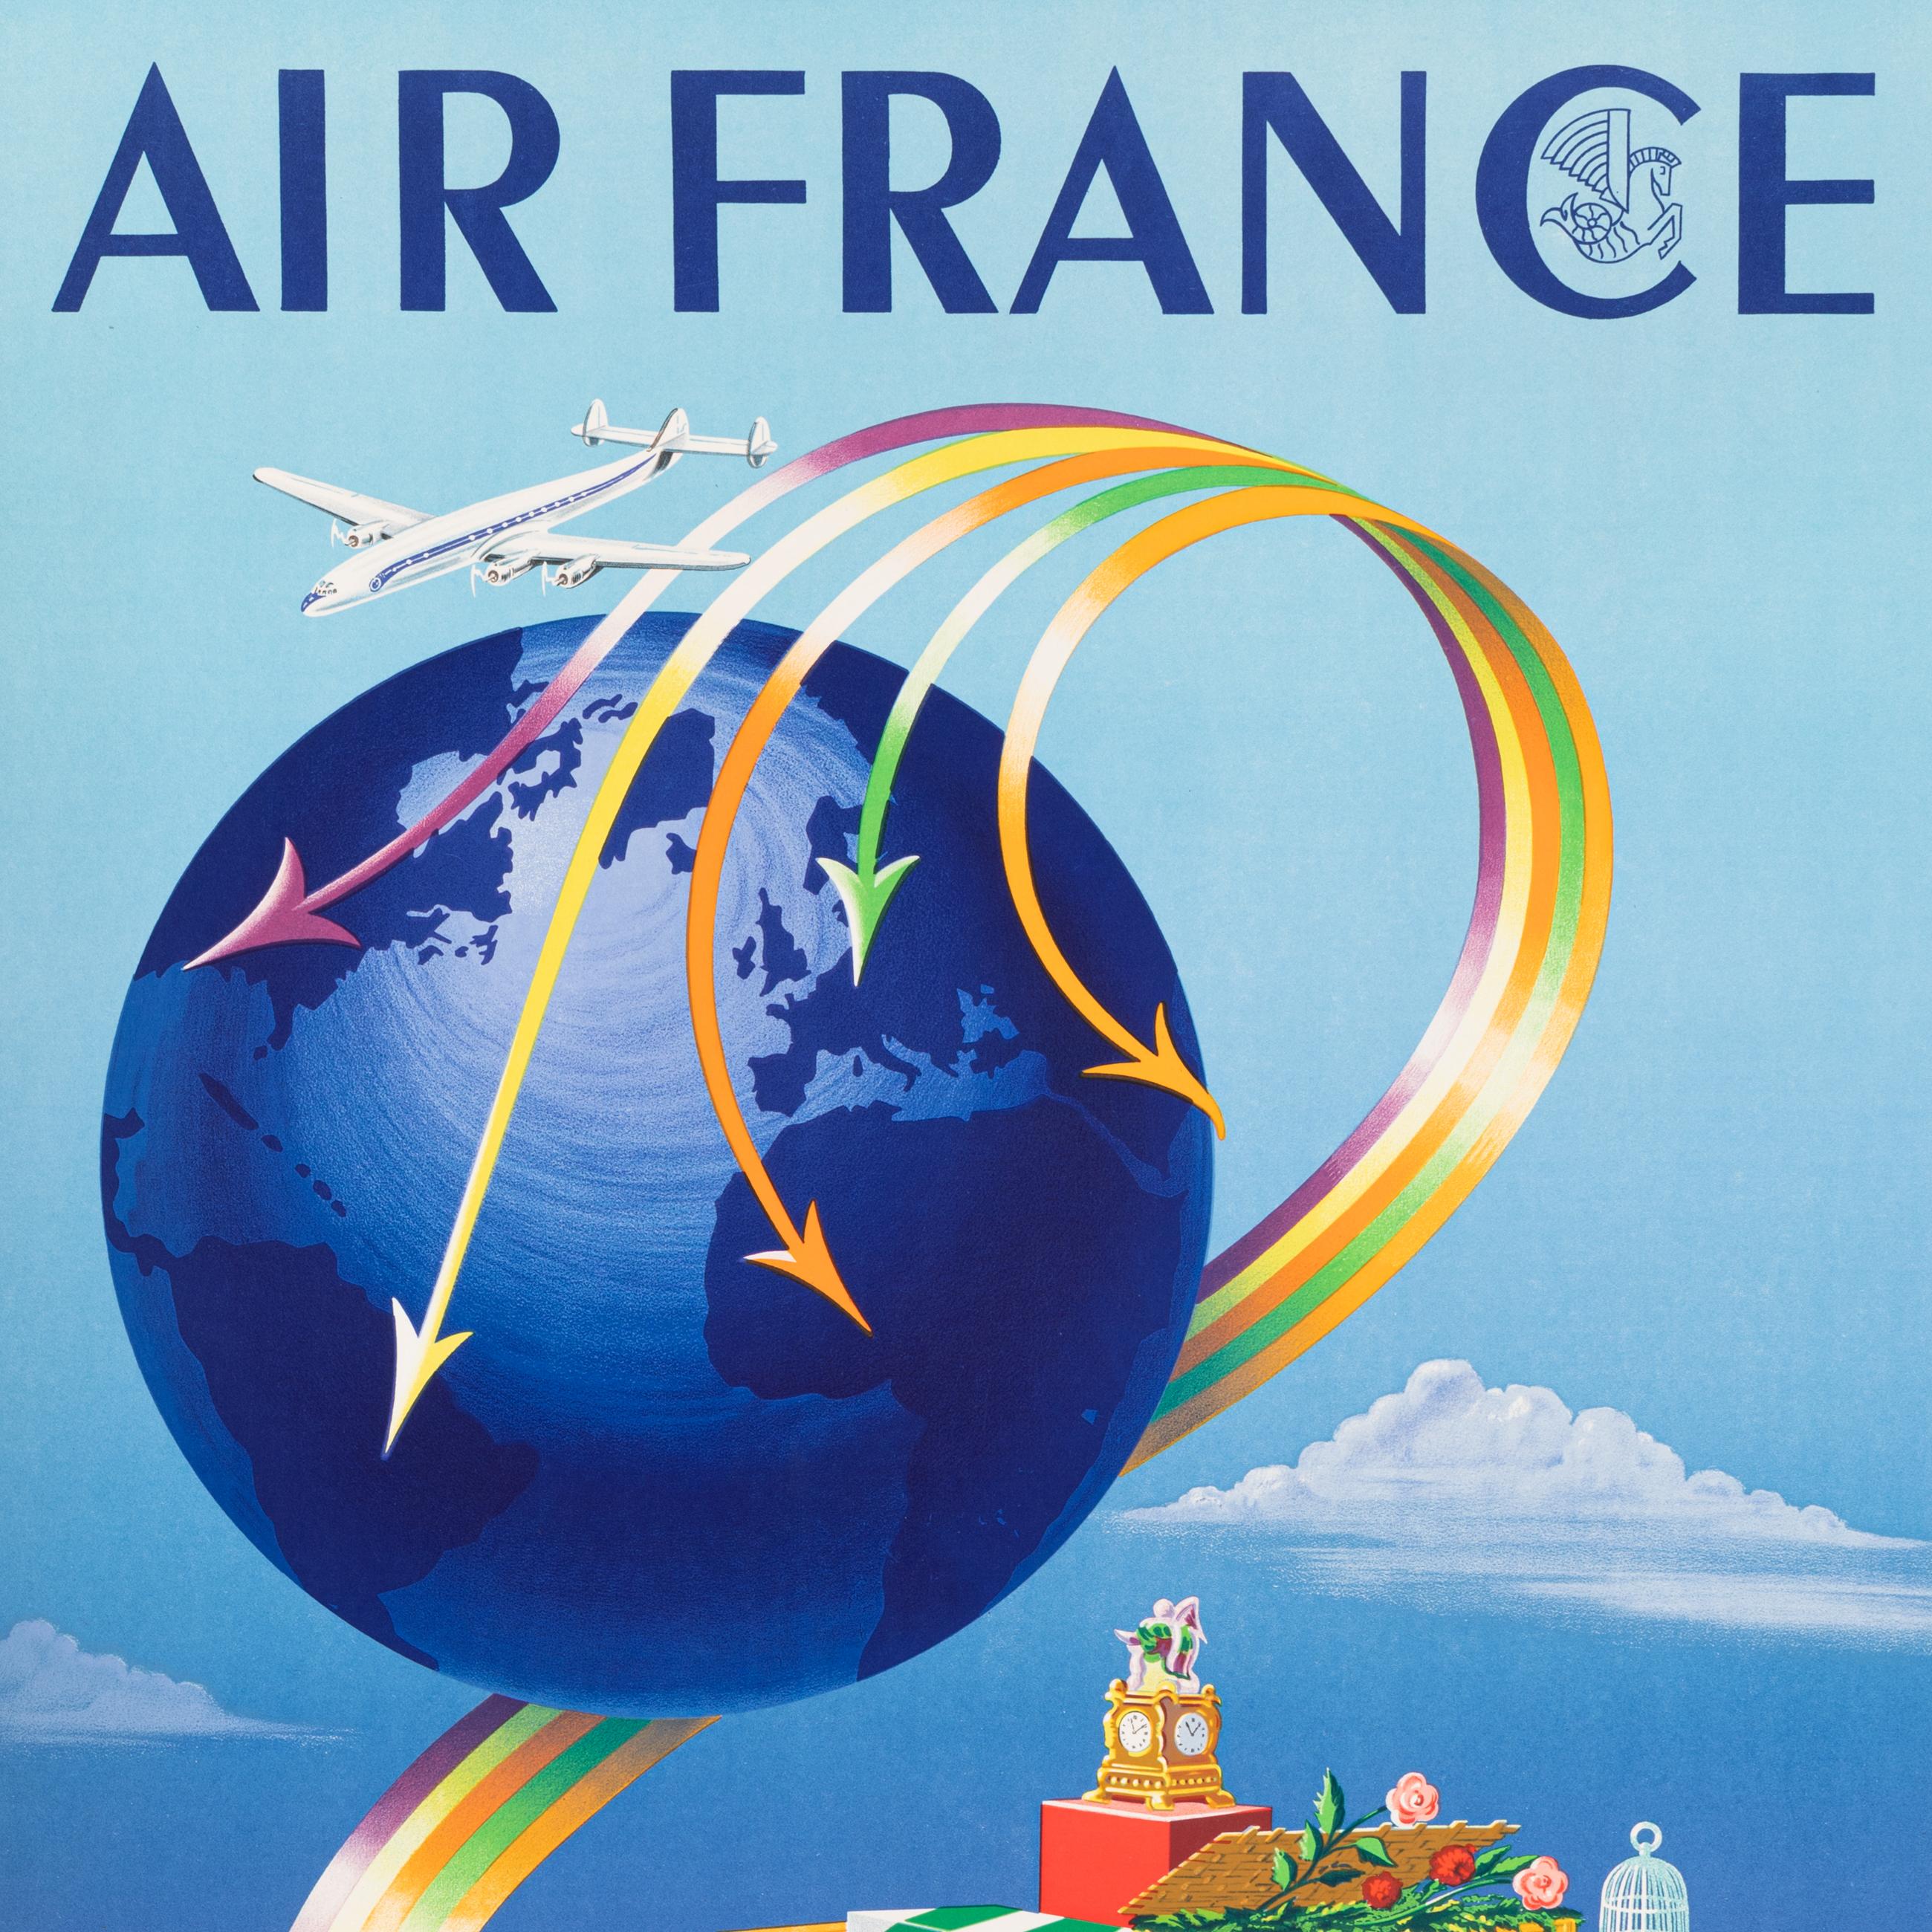 Original Vintage Poster for Air France created by Alphonse Dehedin in 1952.

Artist: Dehedin Alphonse
Title: Air France – Transporte tout, Partout
Date: 1952
Size (w x h): 24,6x 39.4 in / 62 x 100 cm
Printer : Perceval_Paris
Materials and